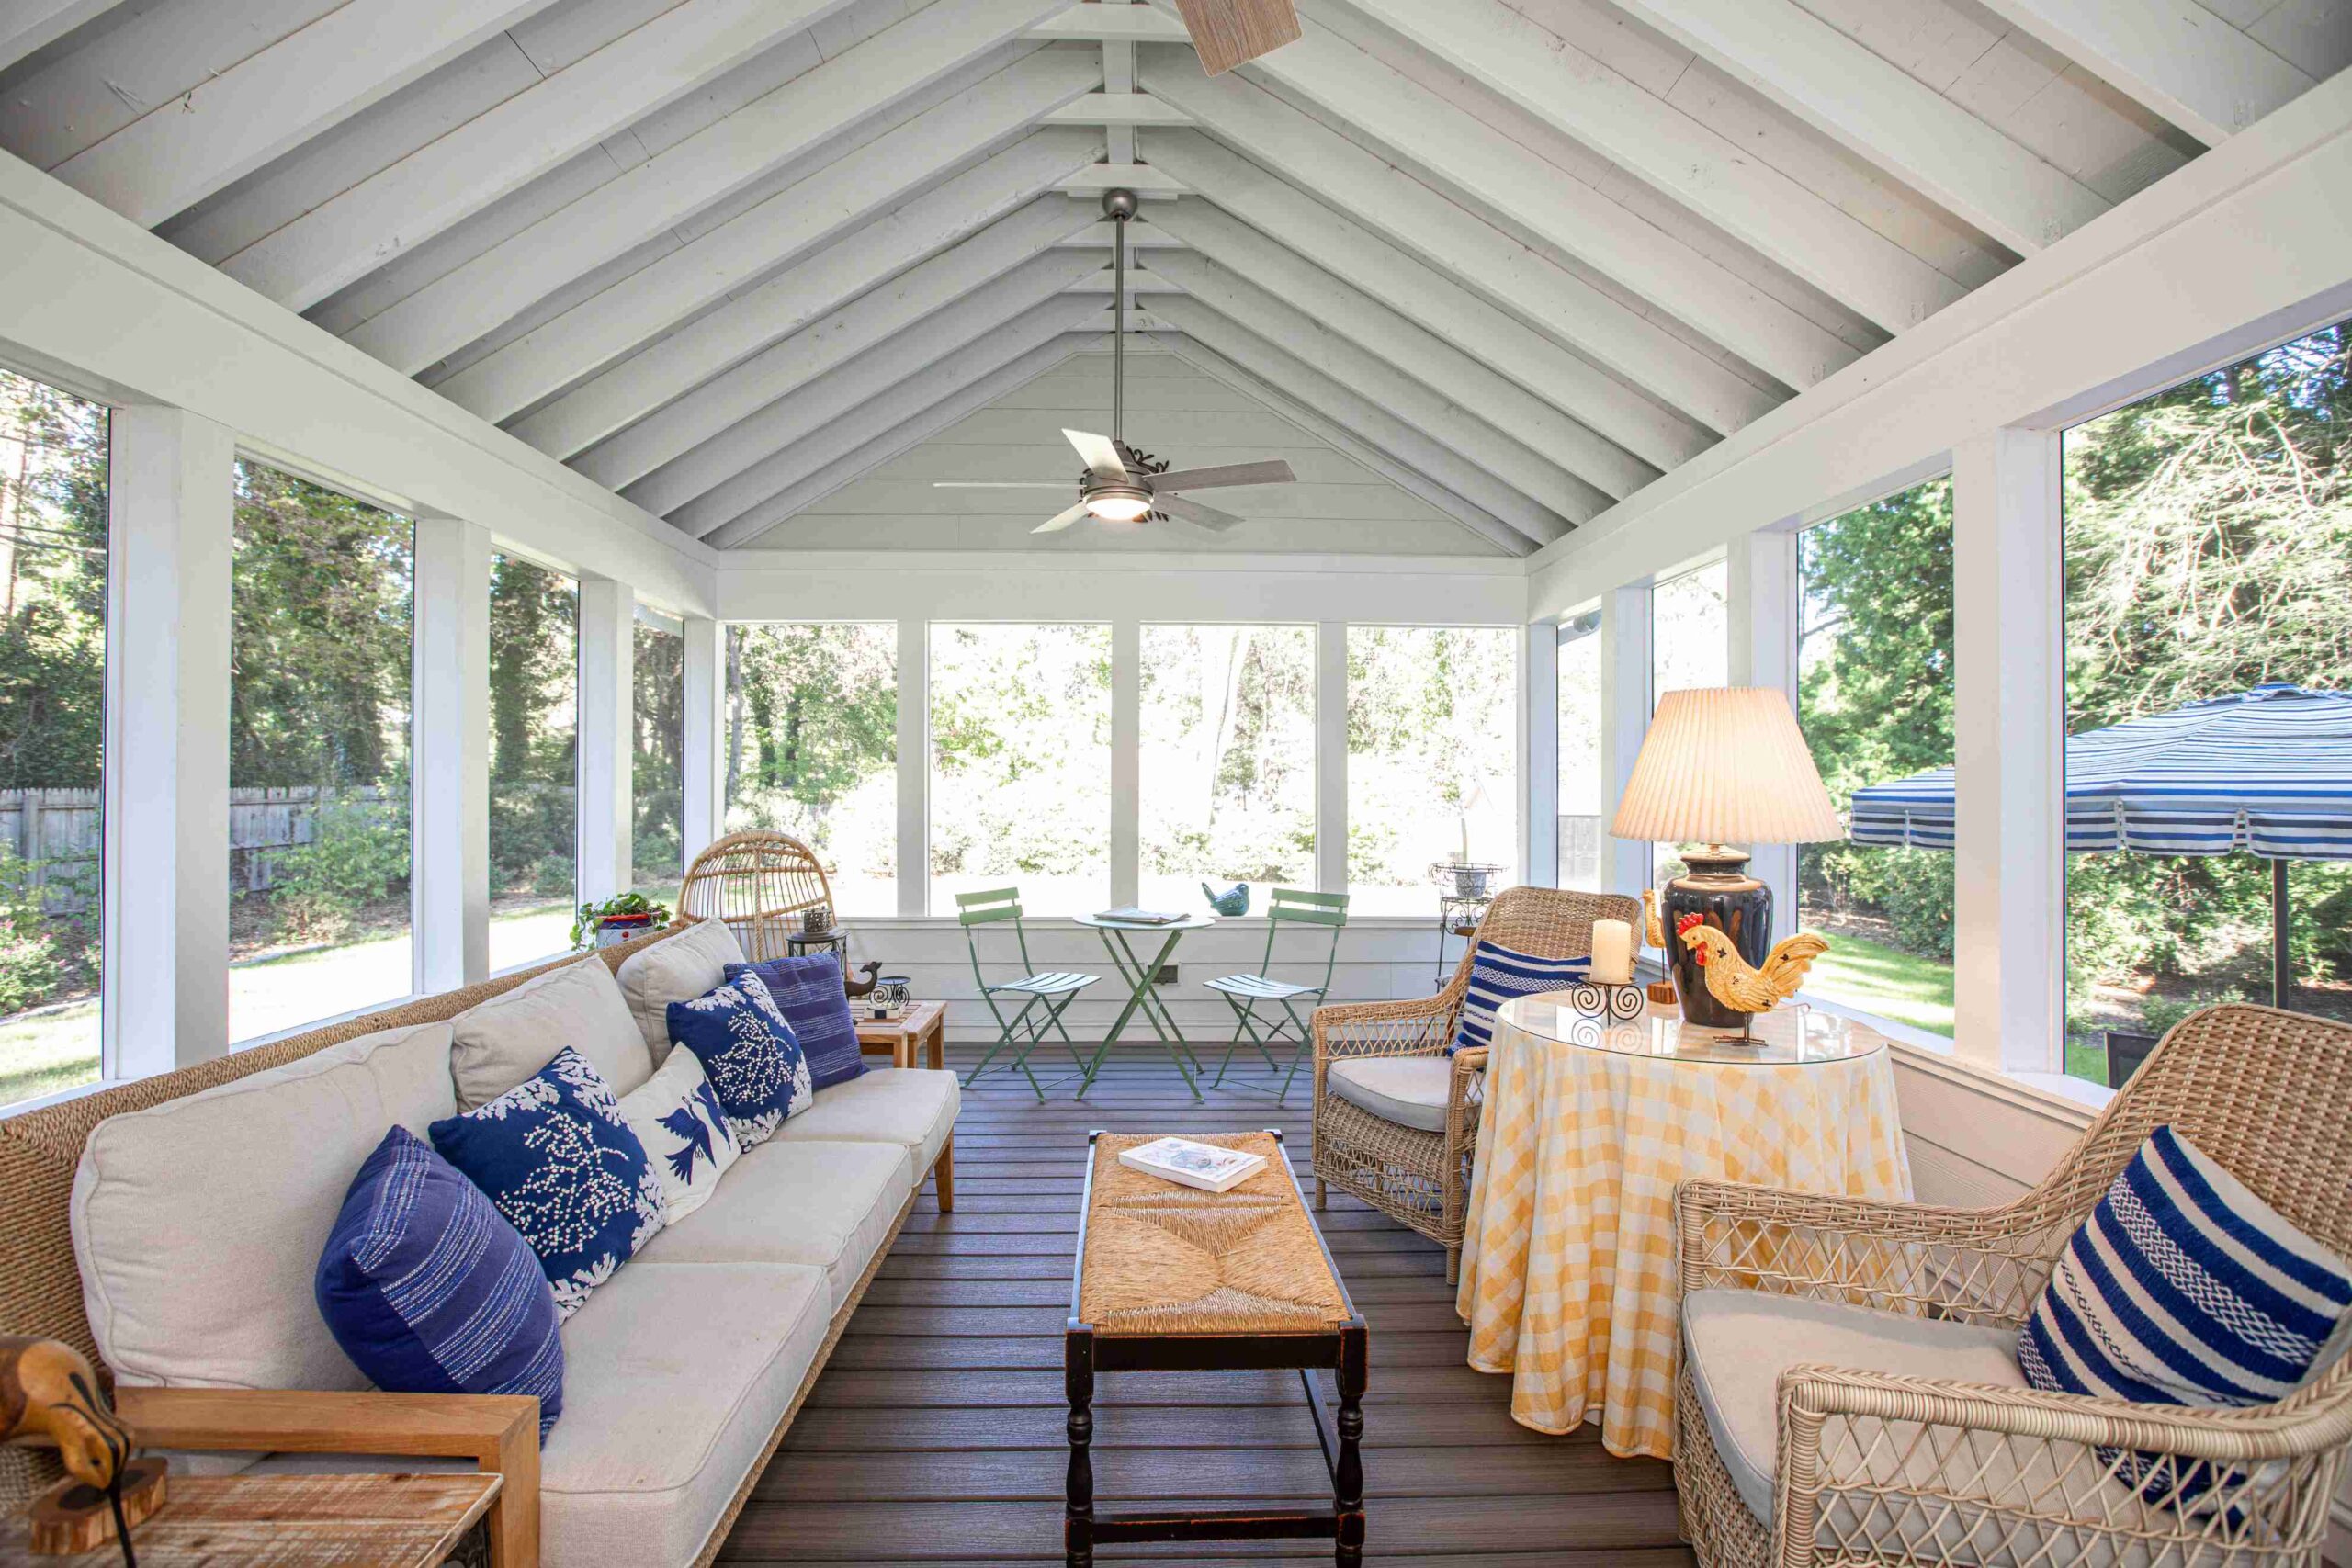 Why You Should Consider a Sunroom Addition